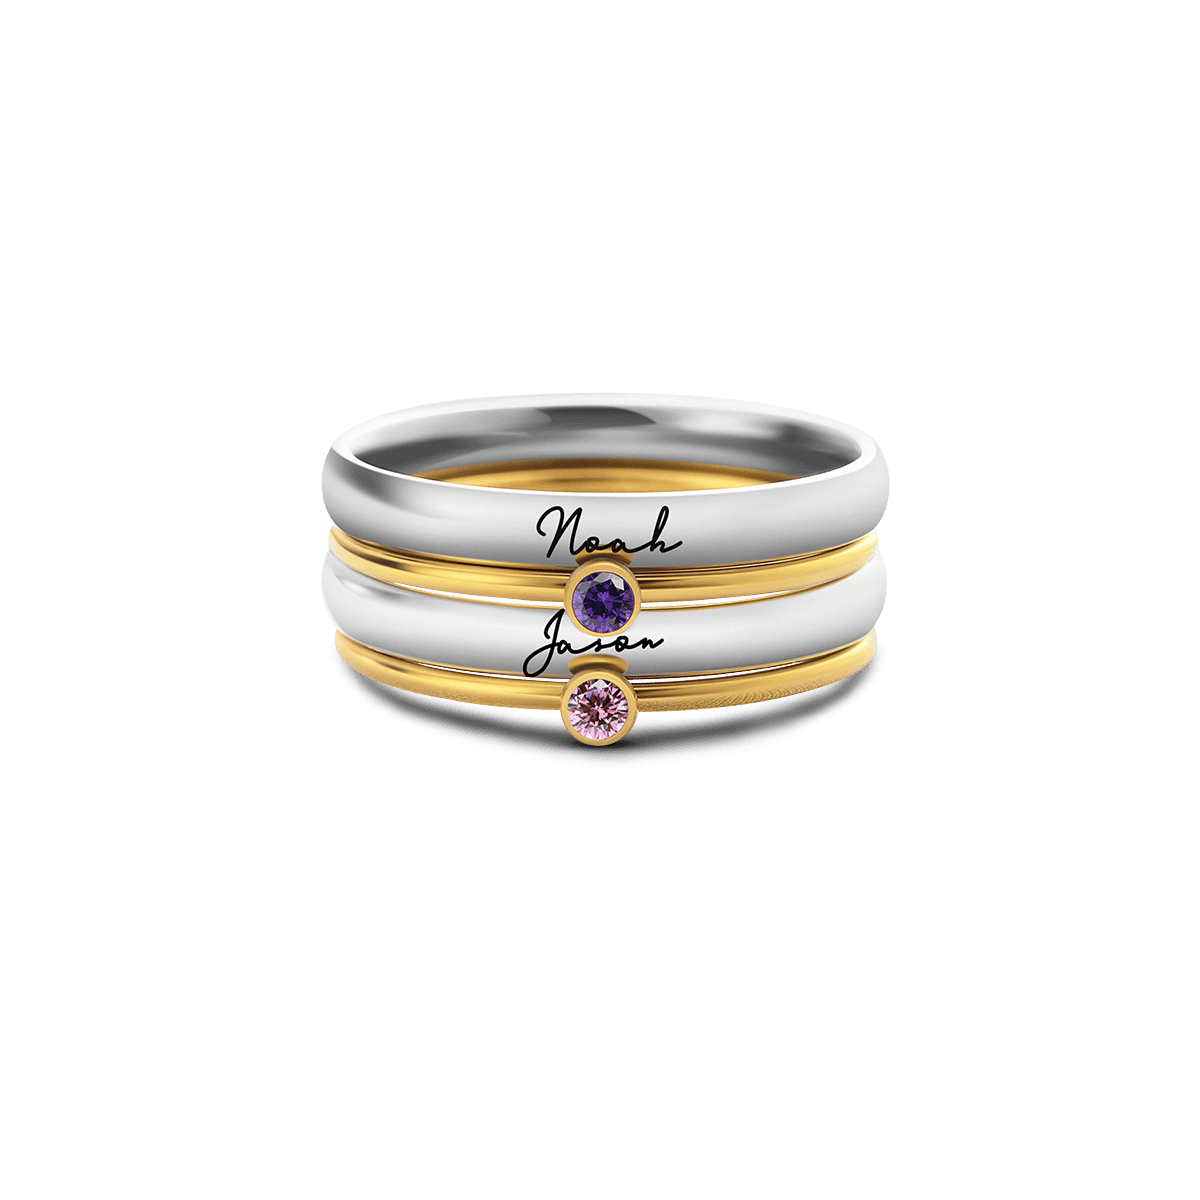 Personalized Engraved Stackable Birthstone Ring Set - Stainless Steel